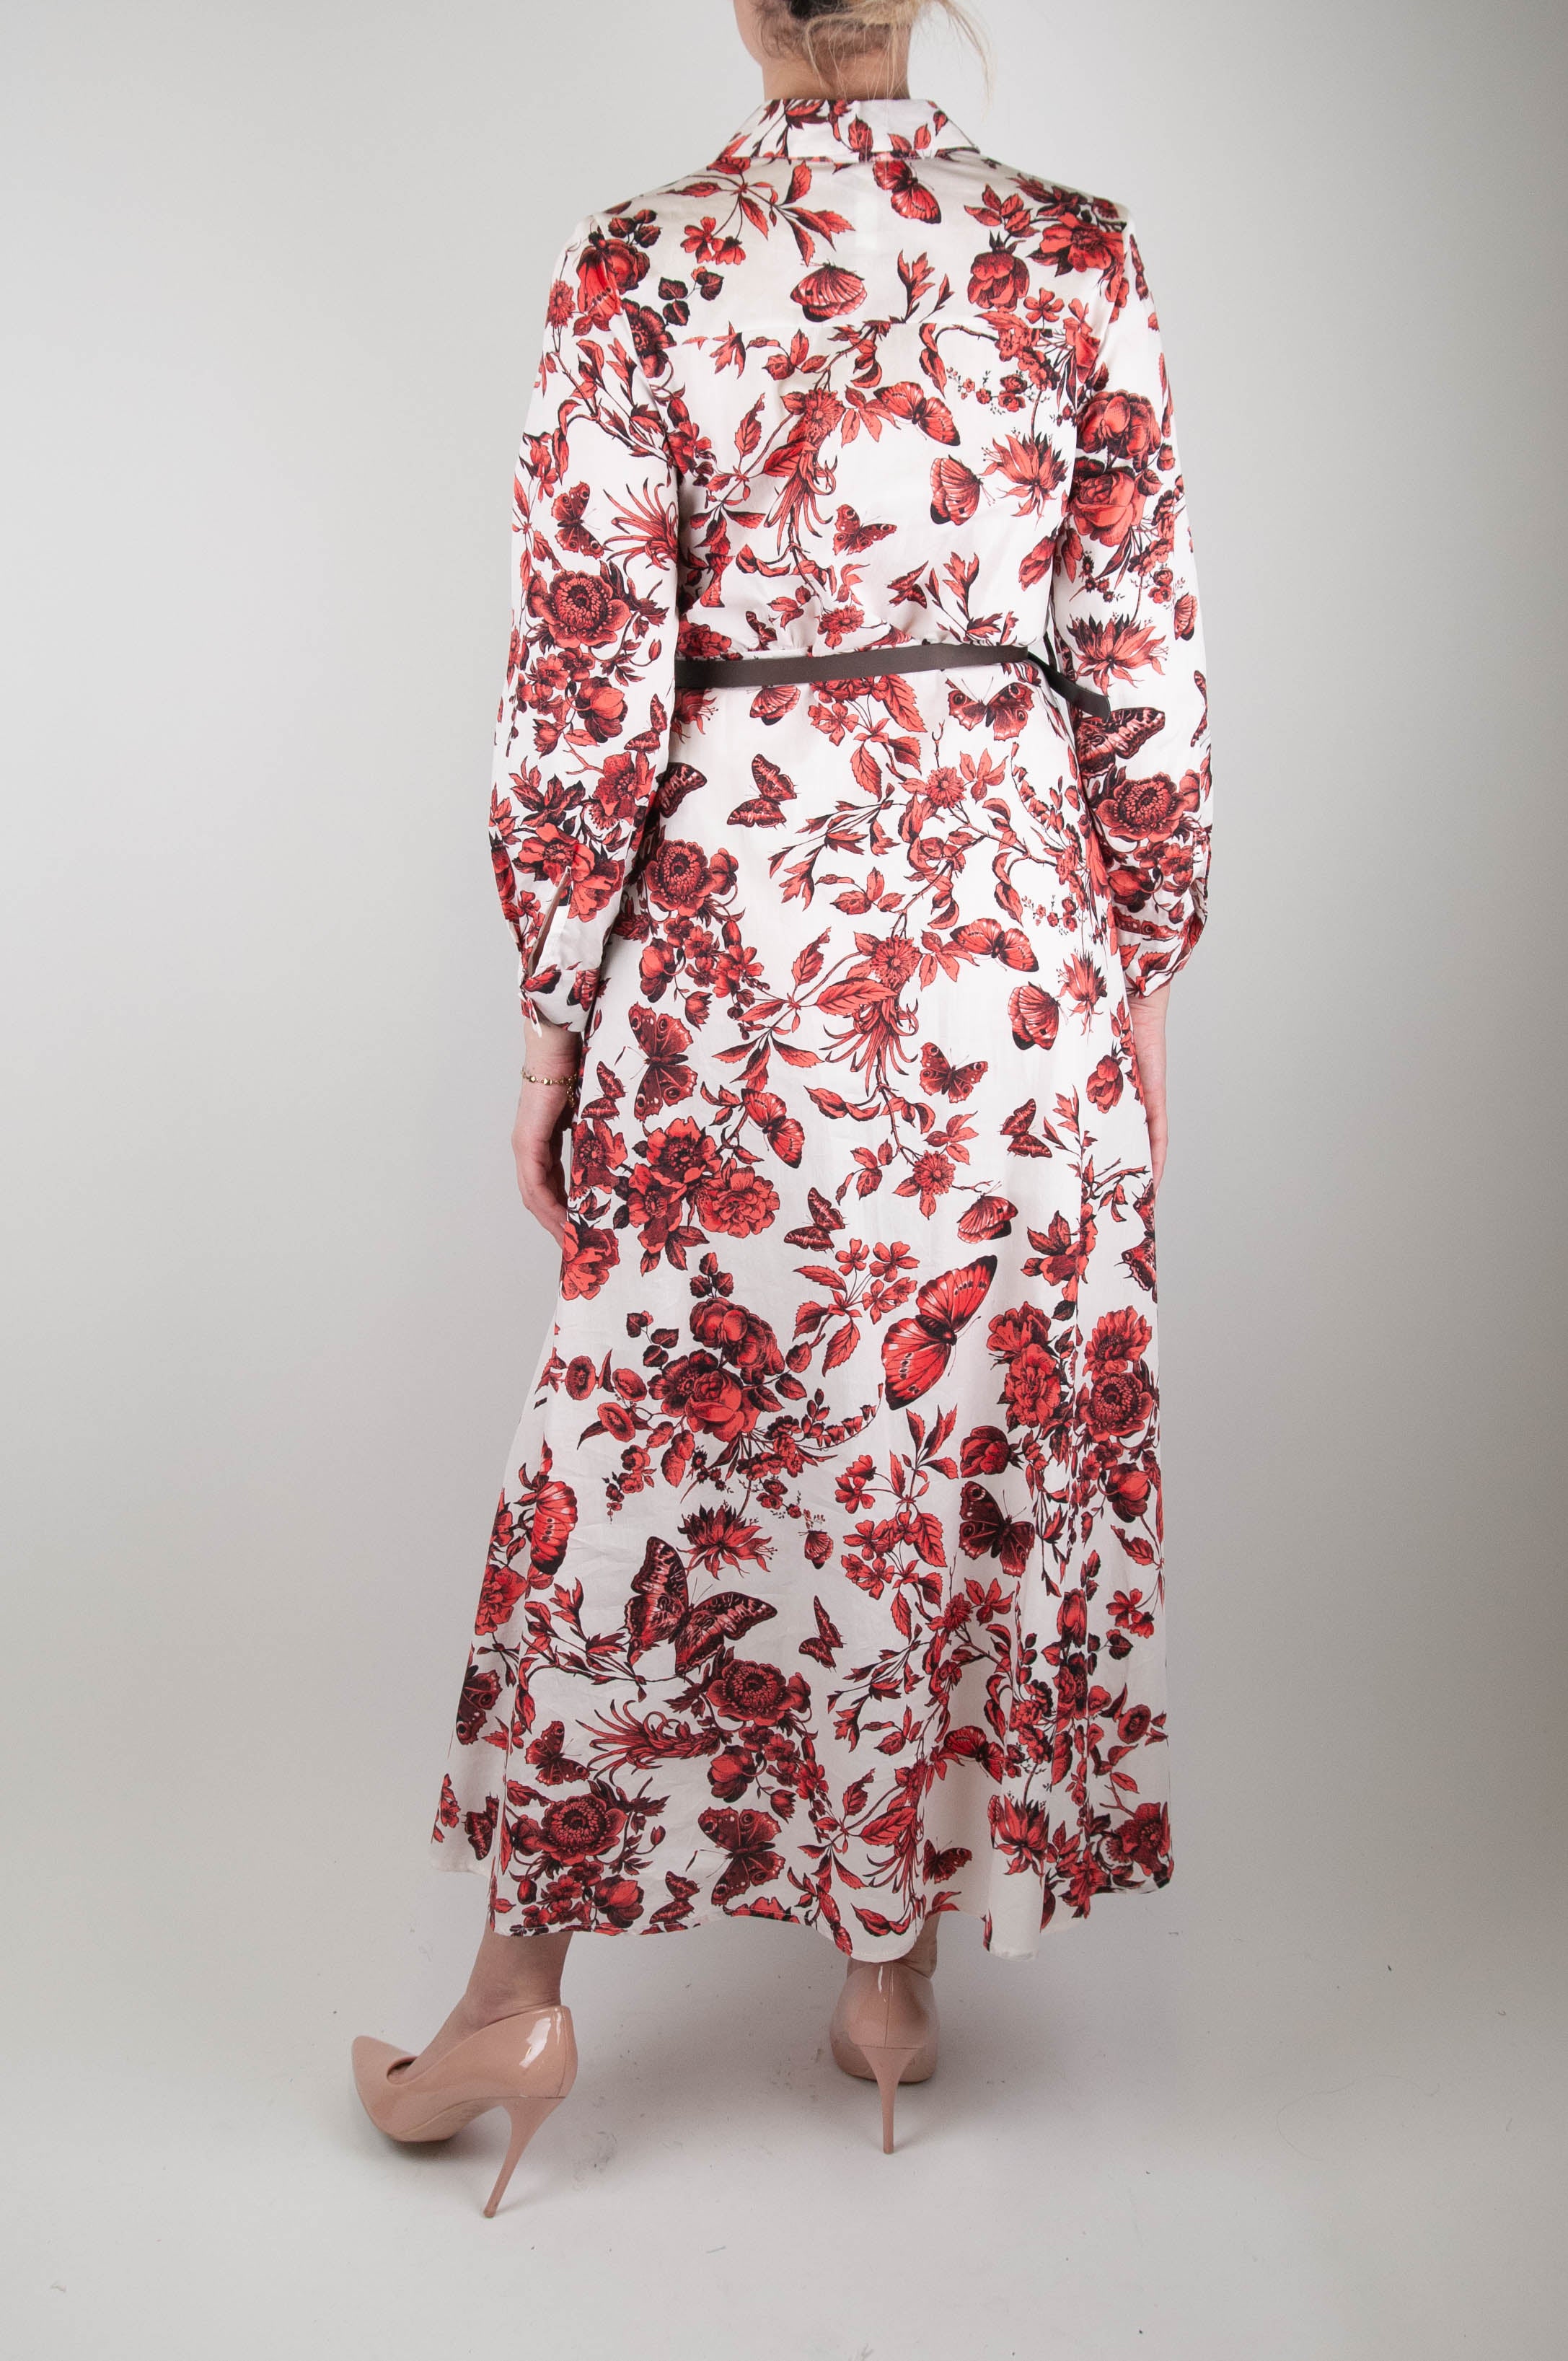 Tension in - Floral patterned shirtdress in cotton muslin